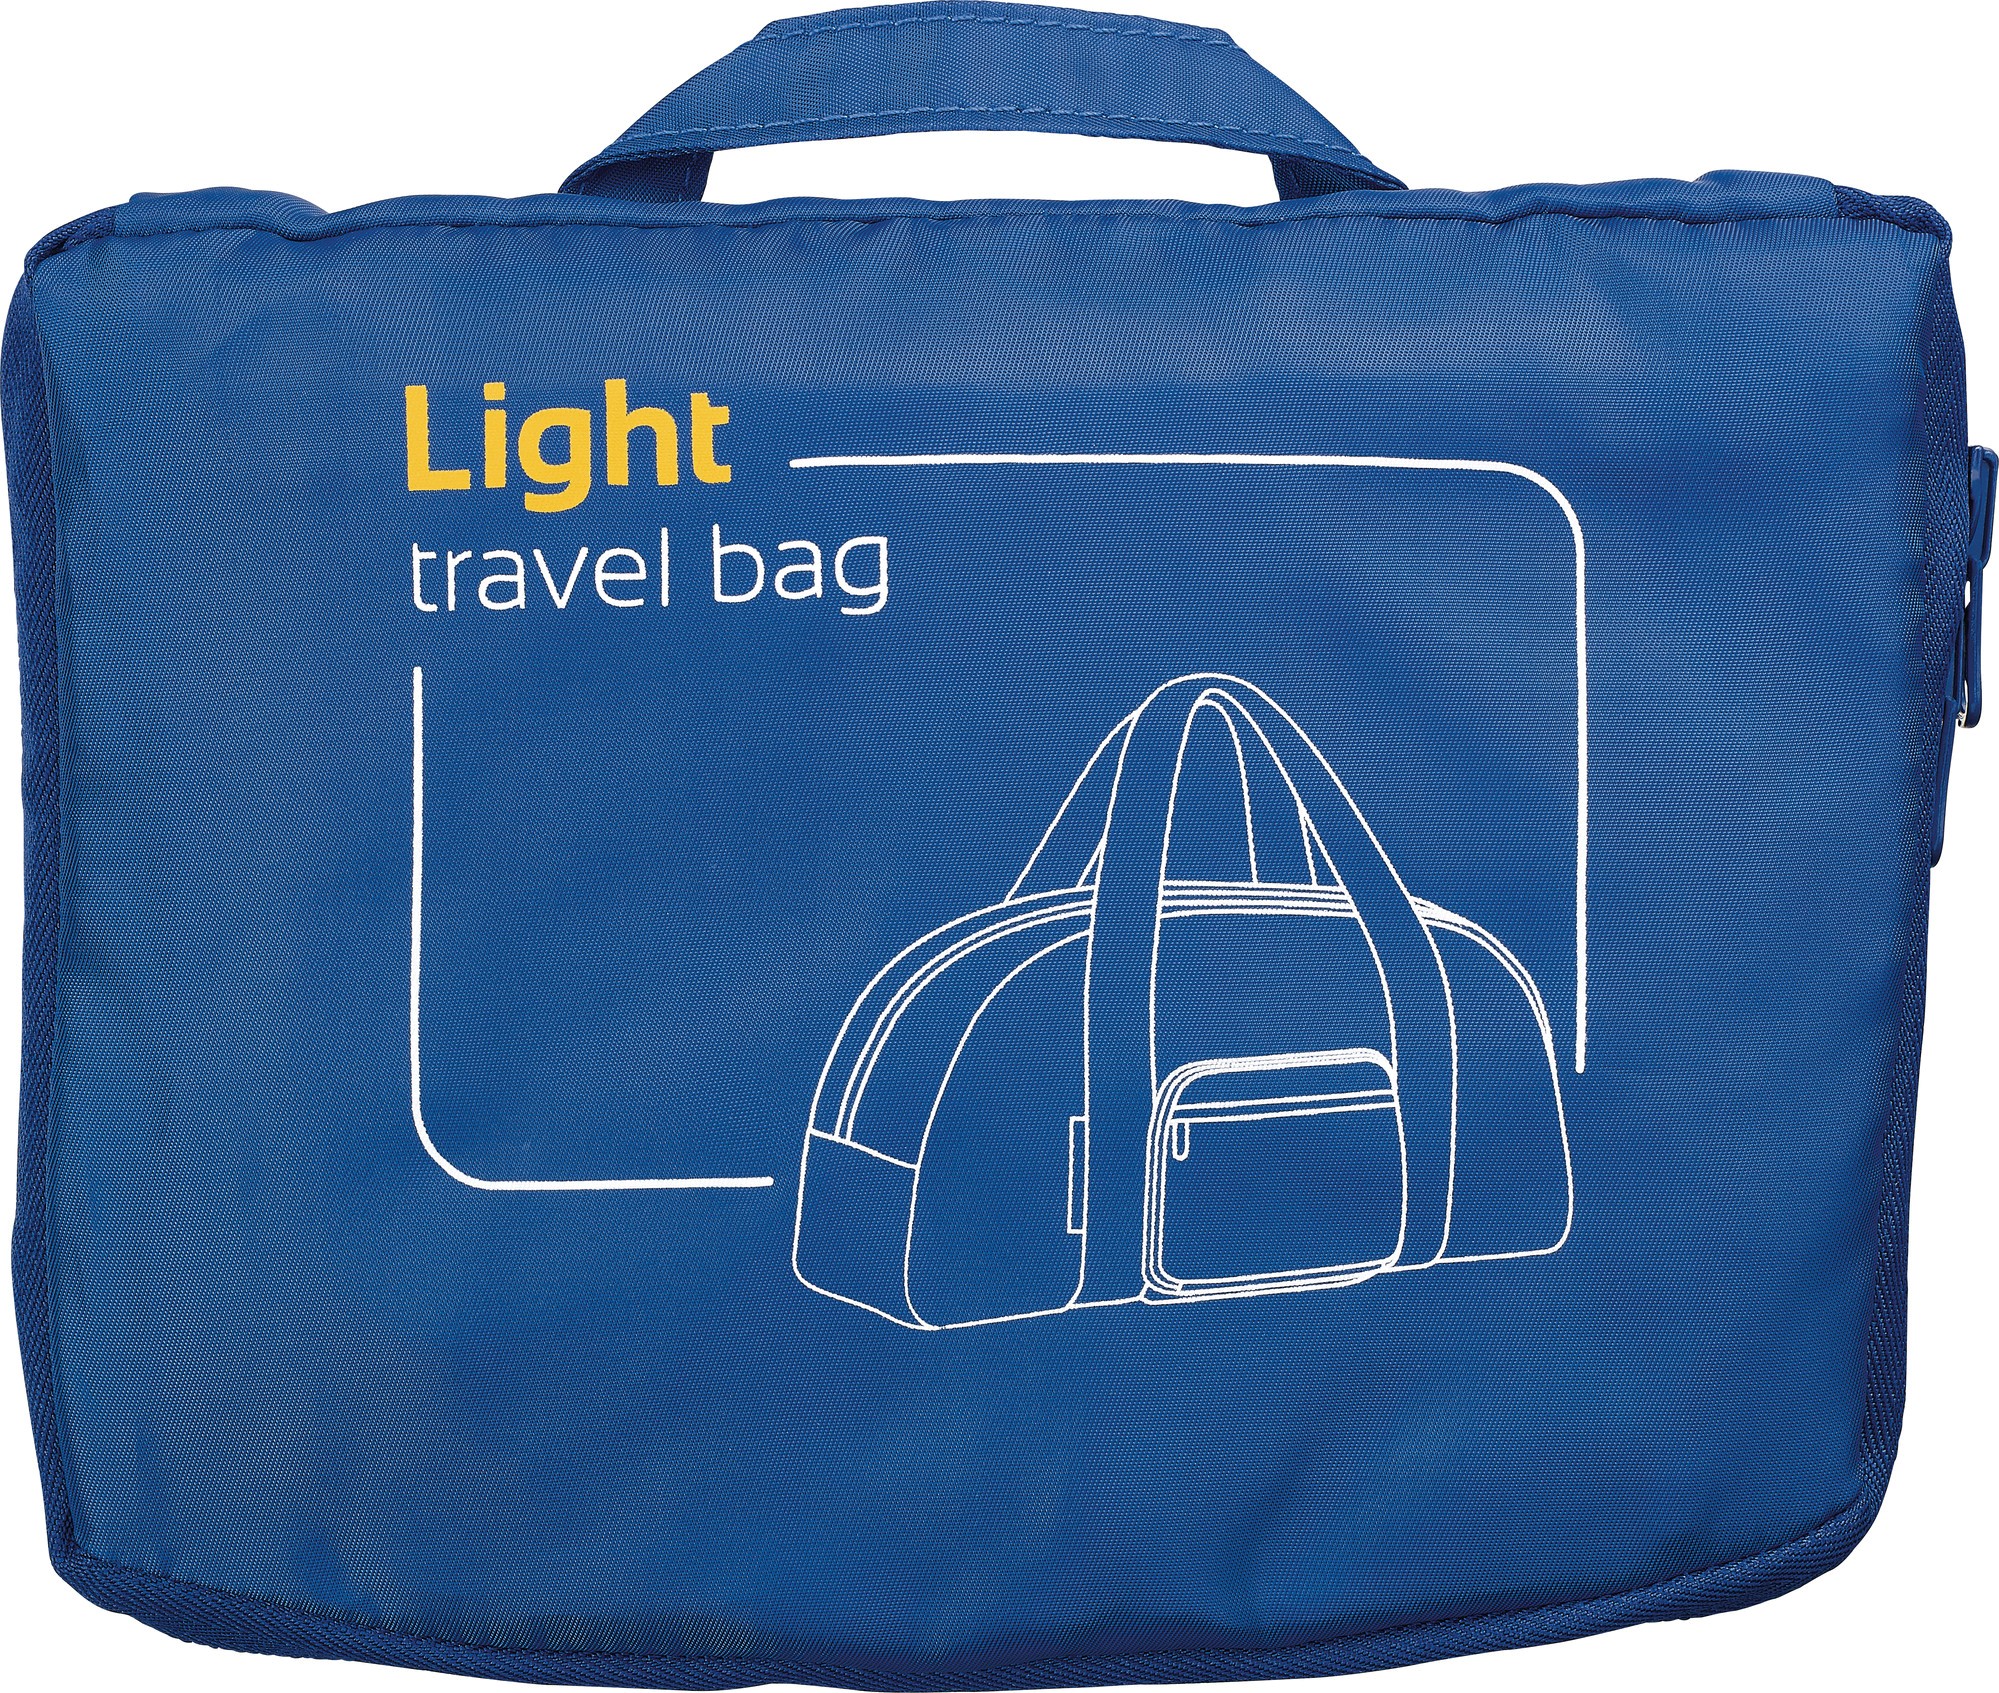 Picture of Go Travel Travel Bag (Light)